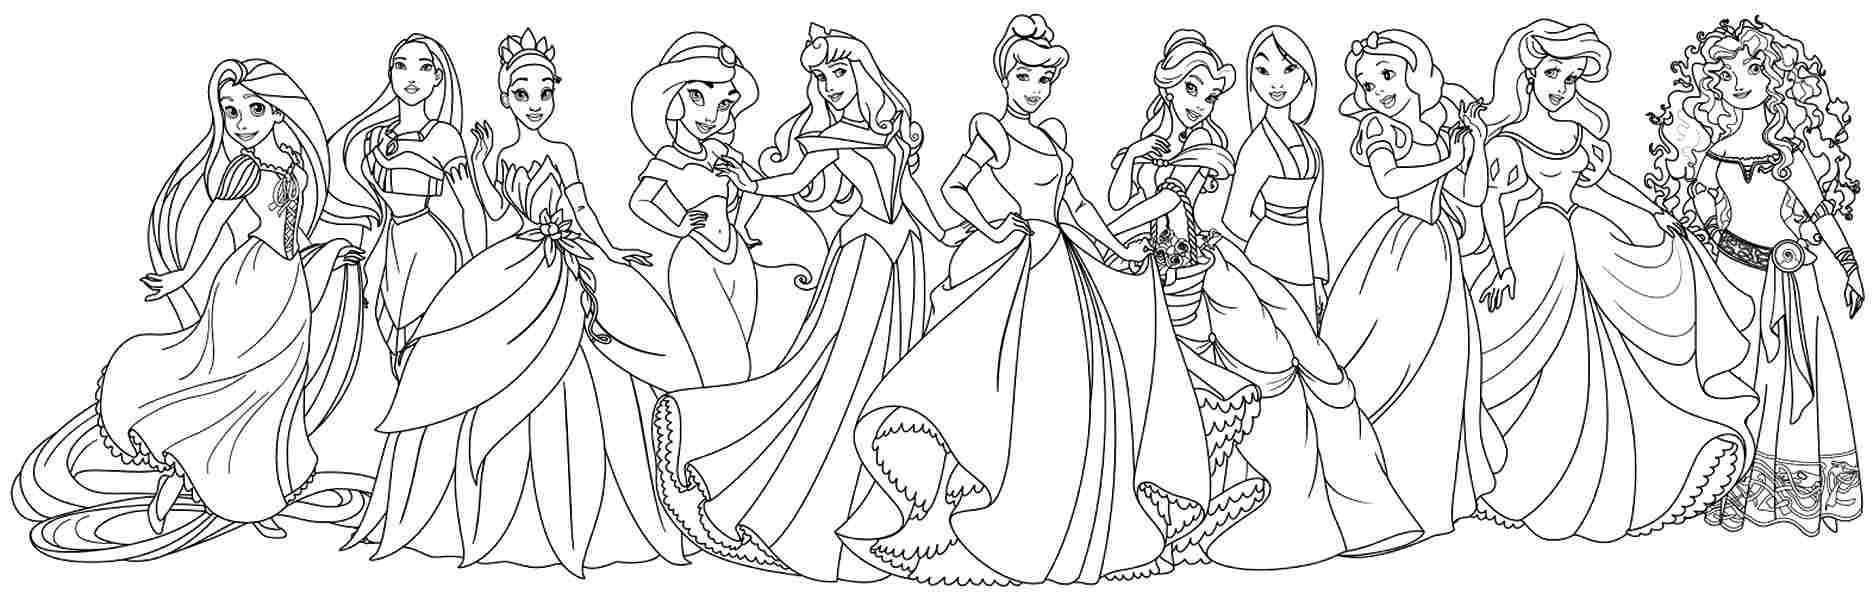 coloring pages for girls 13 and up | Only Coloring Pages